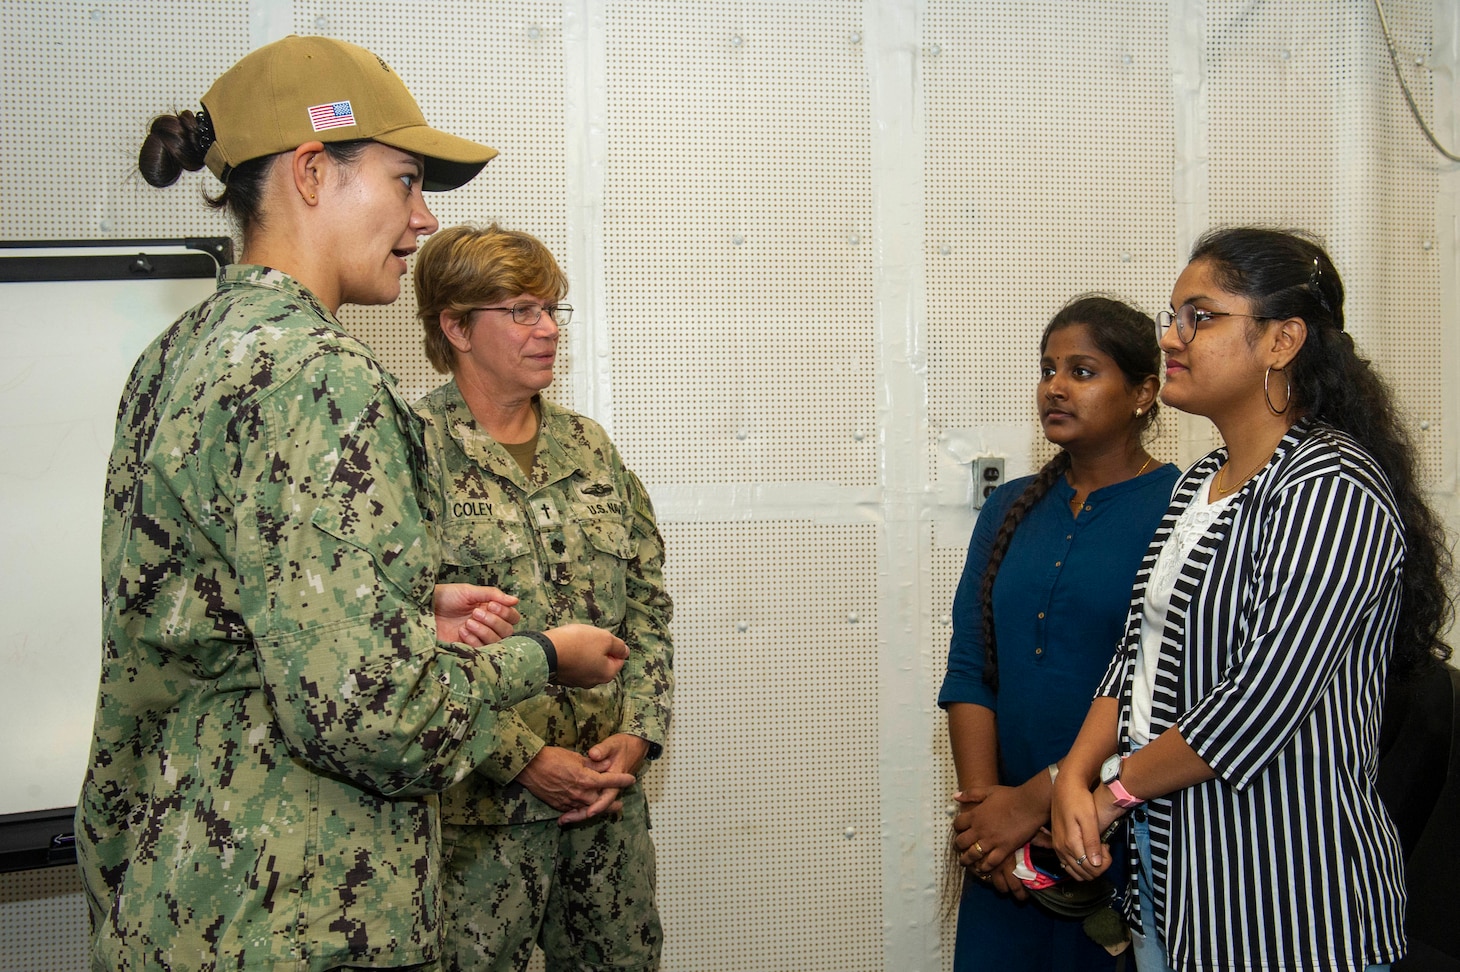 VISAKHAPATNAM, India (Aug. 2, 2022) – Lt. Jacqueline Benedict, the materials supply officer aboard the Emory S. Land-class submarine tender USS Frank Cable (AS 40), and Cmdr. Patricia Coley, the chaplain aboard Frank Cable, speak with students from St. Joseph’s College for Women during a tour of the ship while moored in Visakhapatnam, India, Aug. 2, 2022. Frank Cable is currently on patrol conducting expeditionary maintenance and logistics in the 7th Fleet area of operations in support of a free and open Indo-Pacific. (U.S. Navy photo by Mass Communication Specialist 2nd Class Kaitlyn E. Eads)